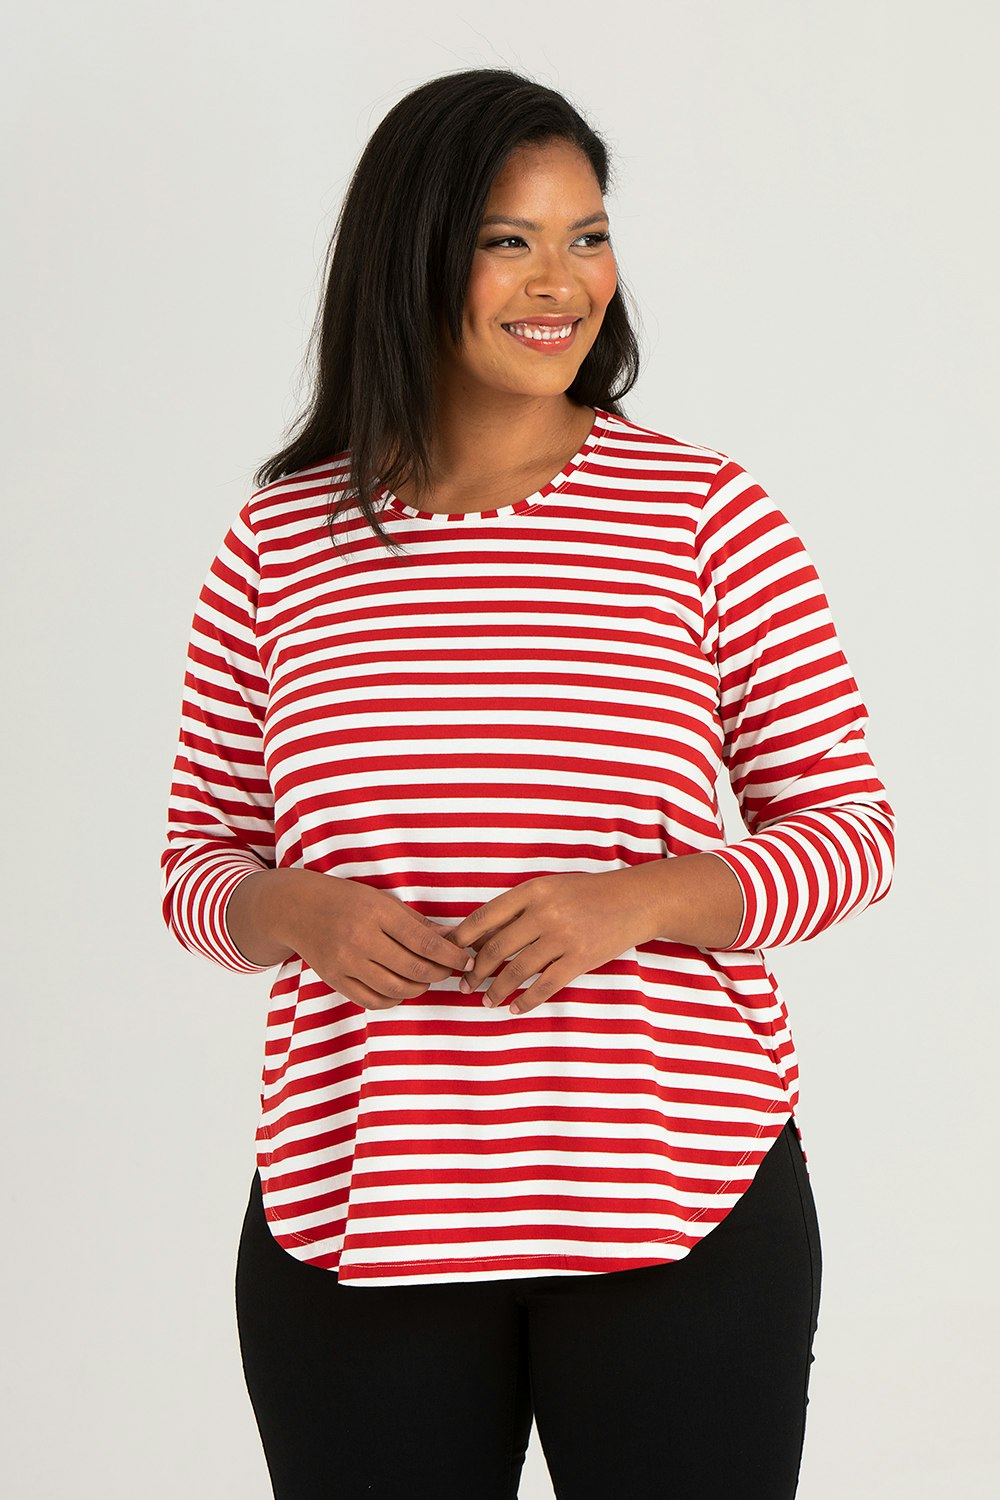 Kitty top striped red/white